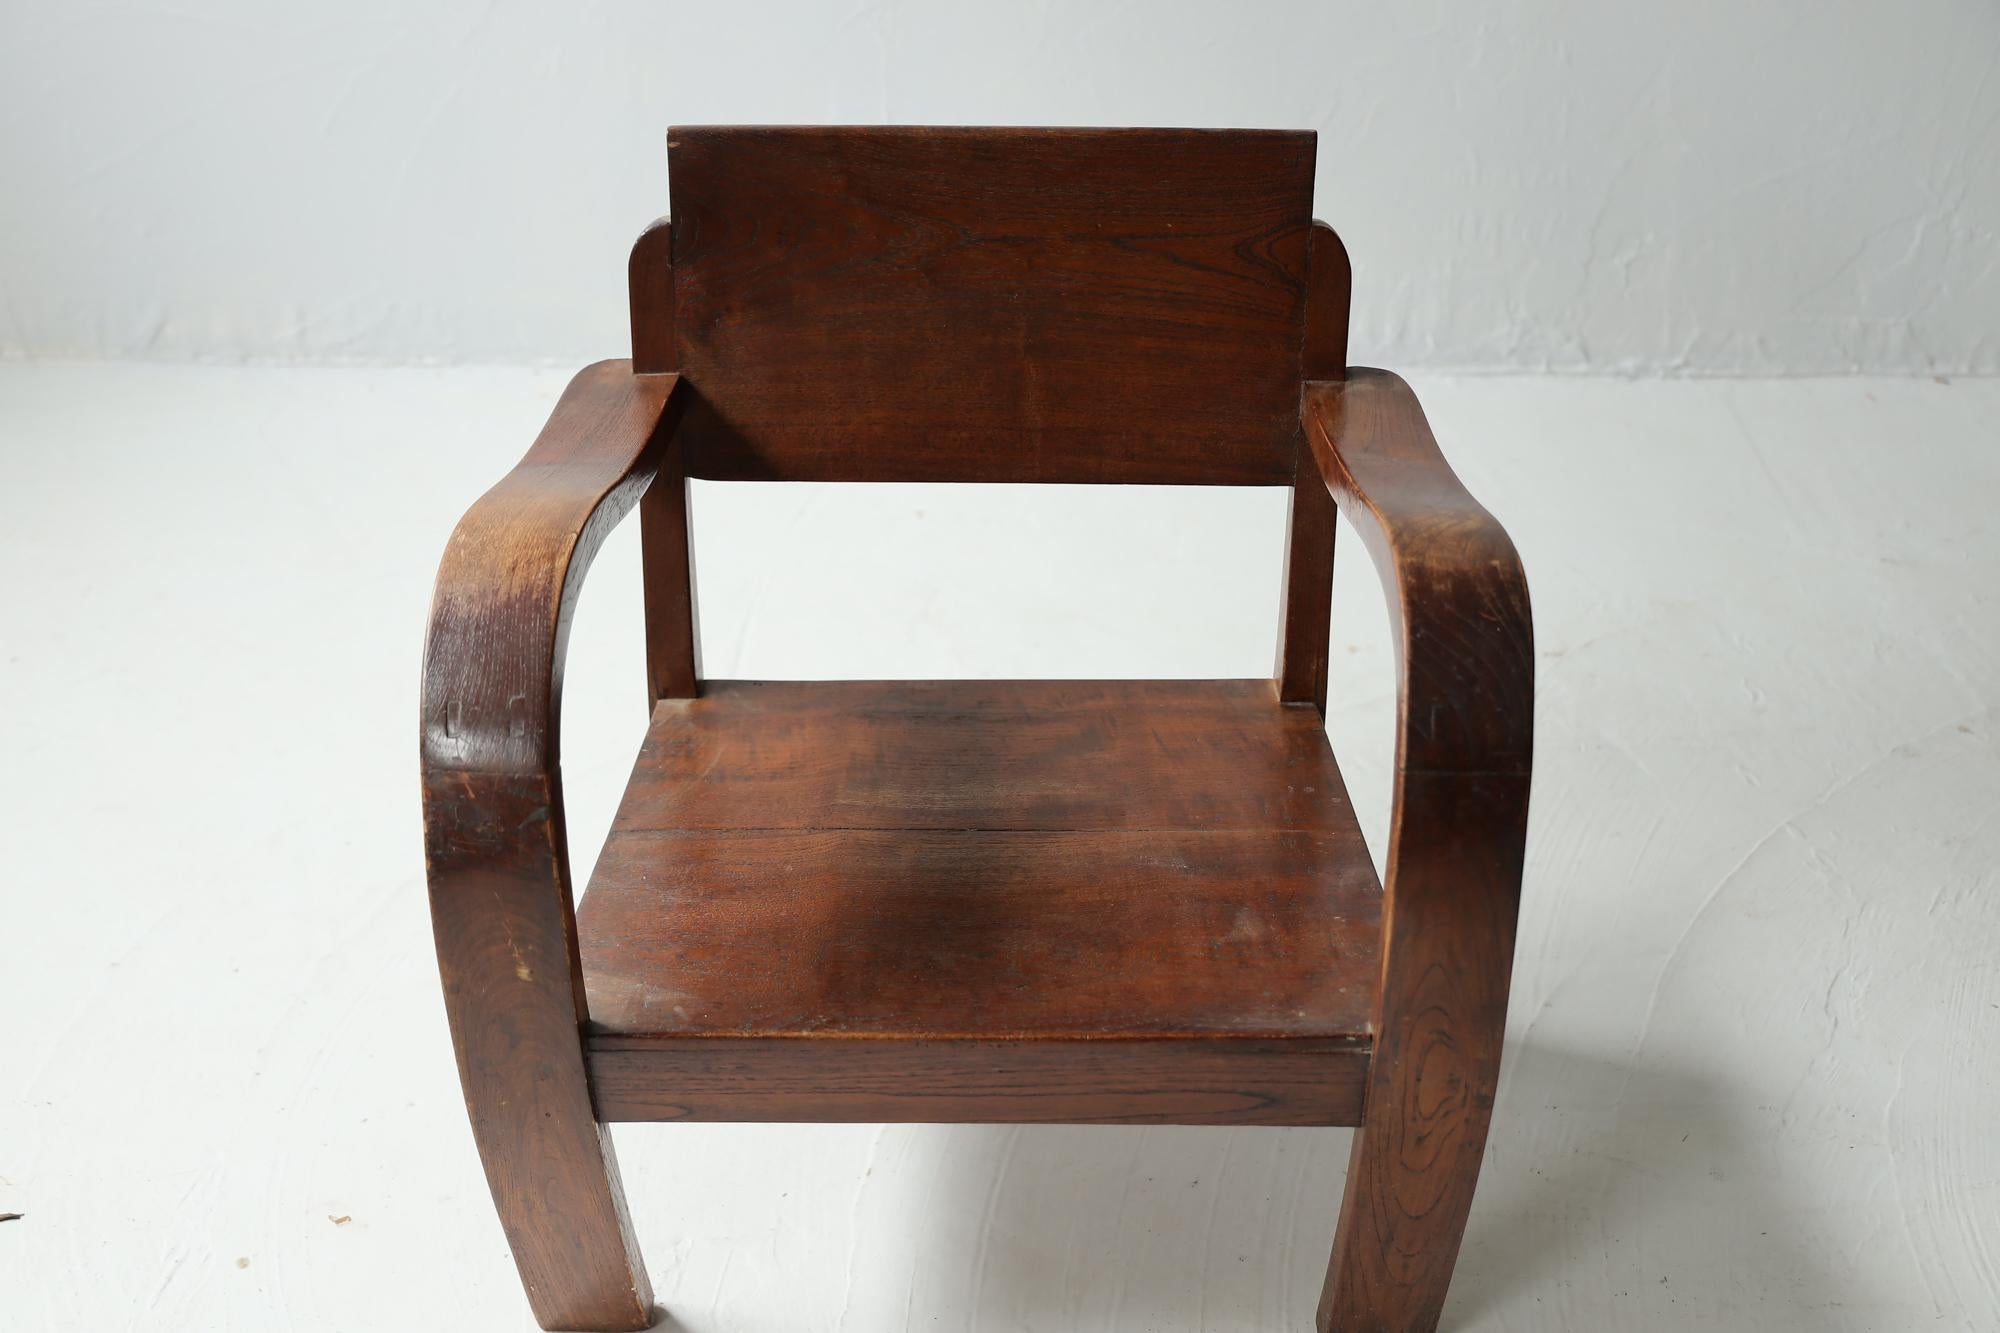 Hand-Carved Japanese Antique Chair, Primitive Japanese Wooden Chair, Wabi-Sabi For Sale